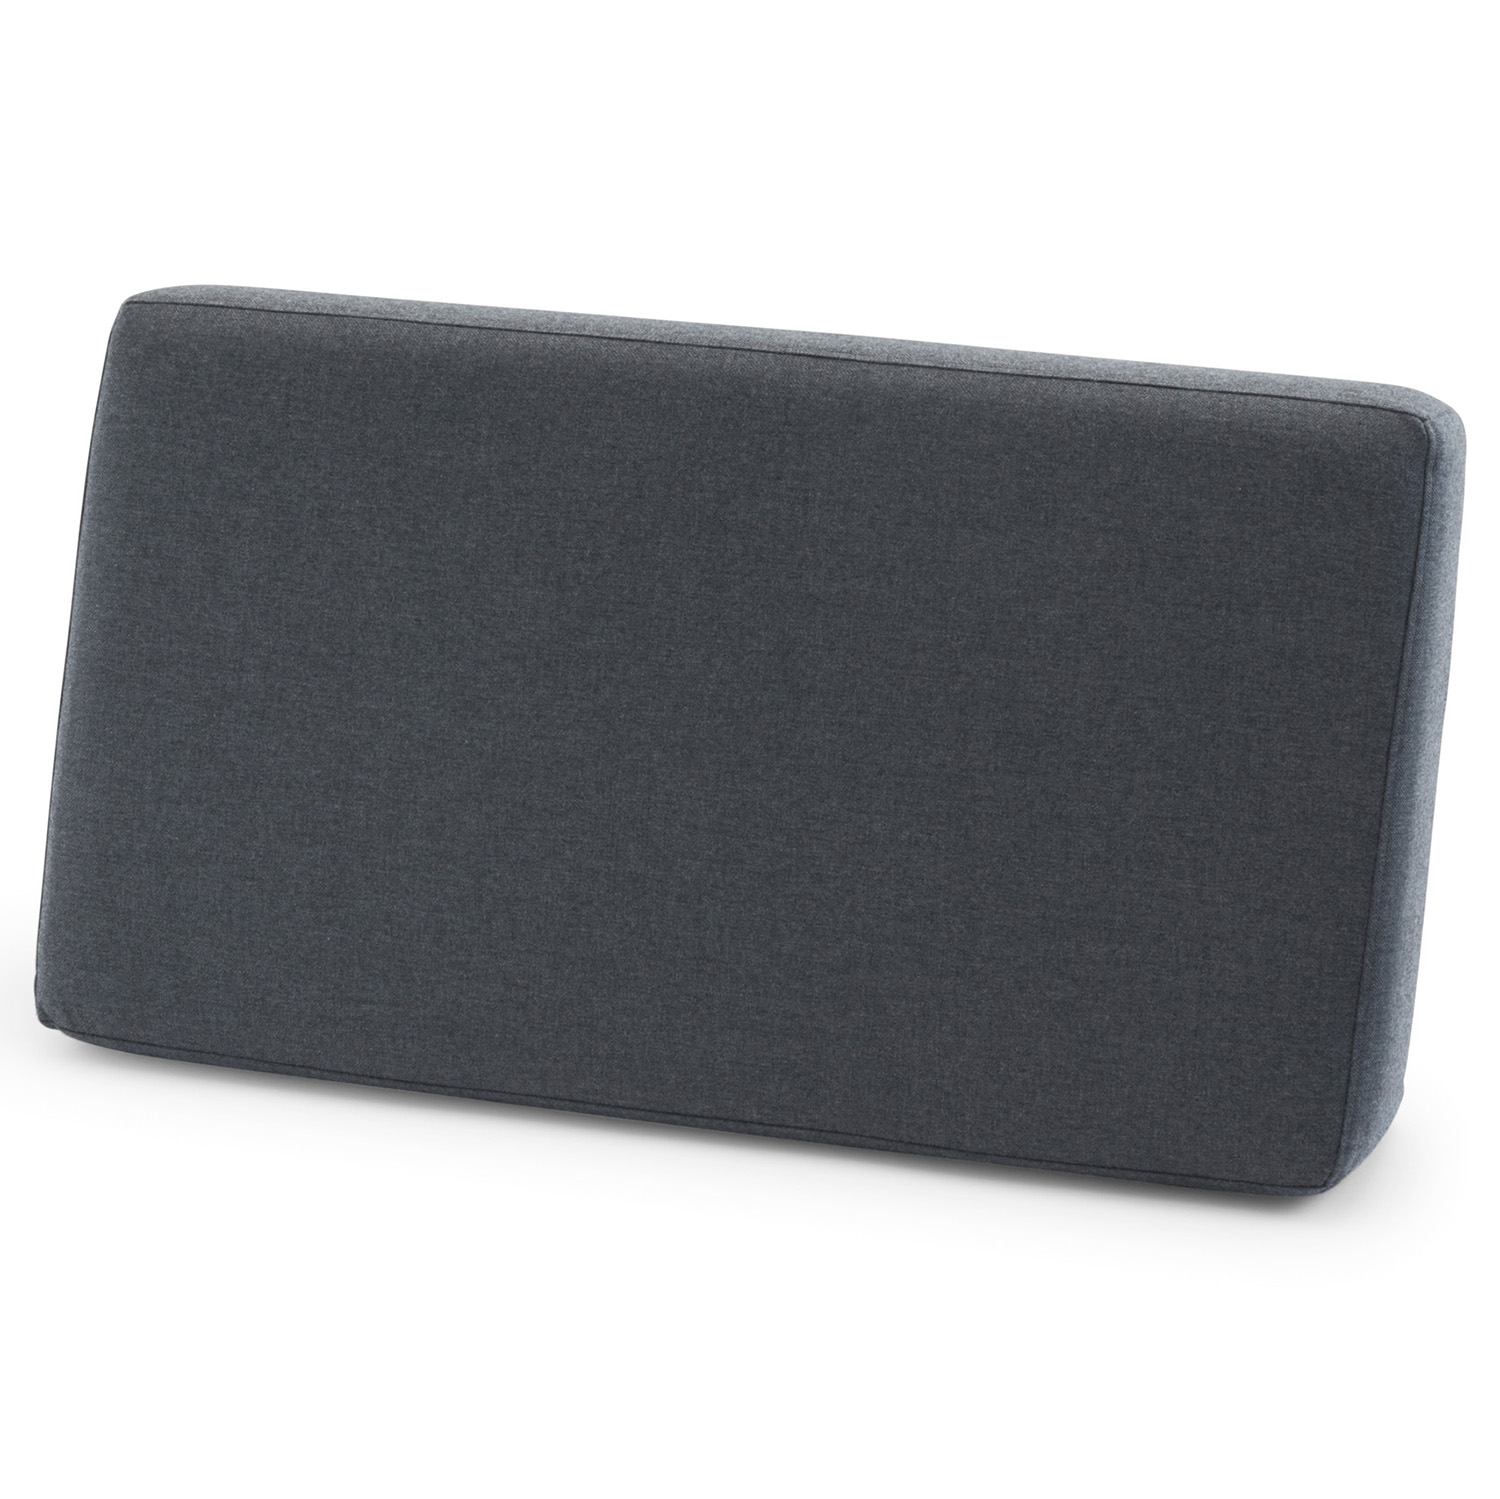 Skagerak Tradition Spacer & Lounge Chair Back Cushion Charcoal